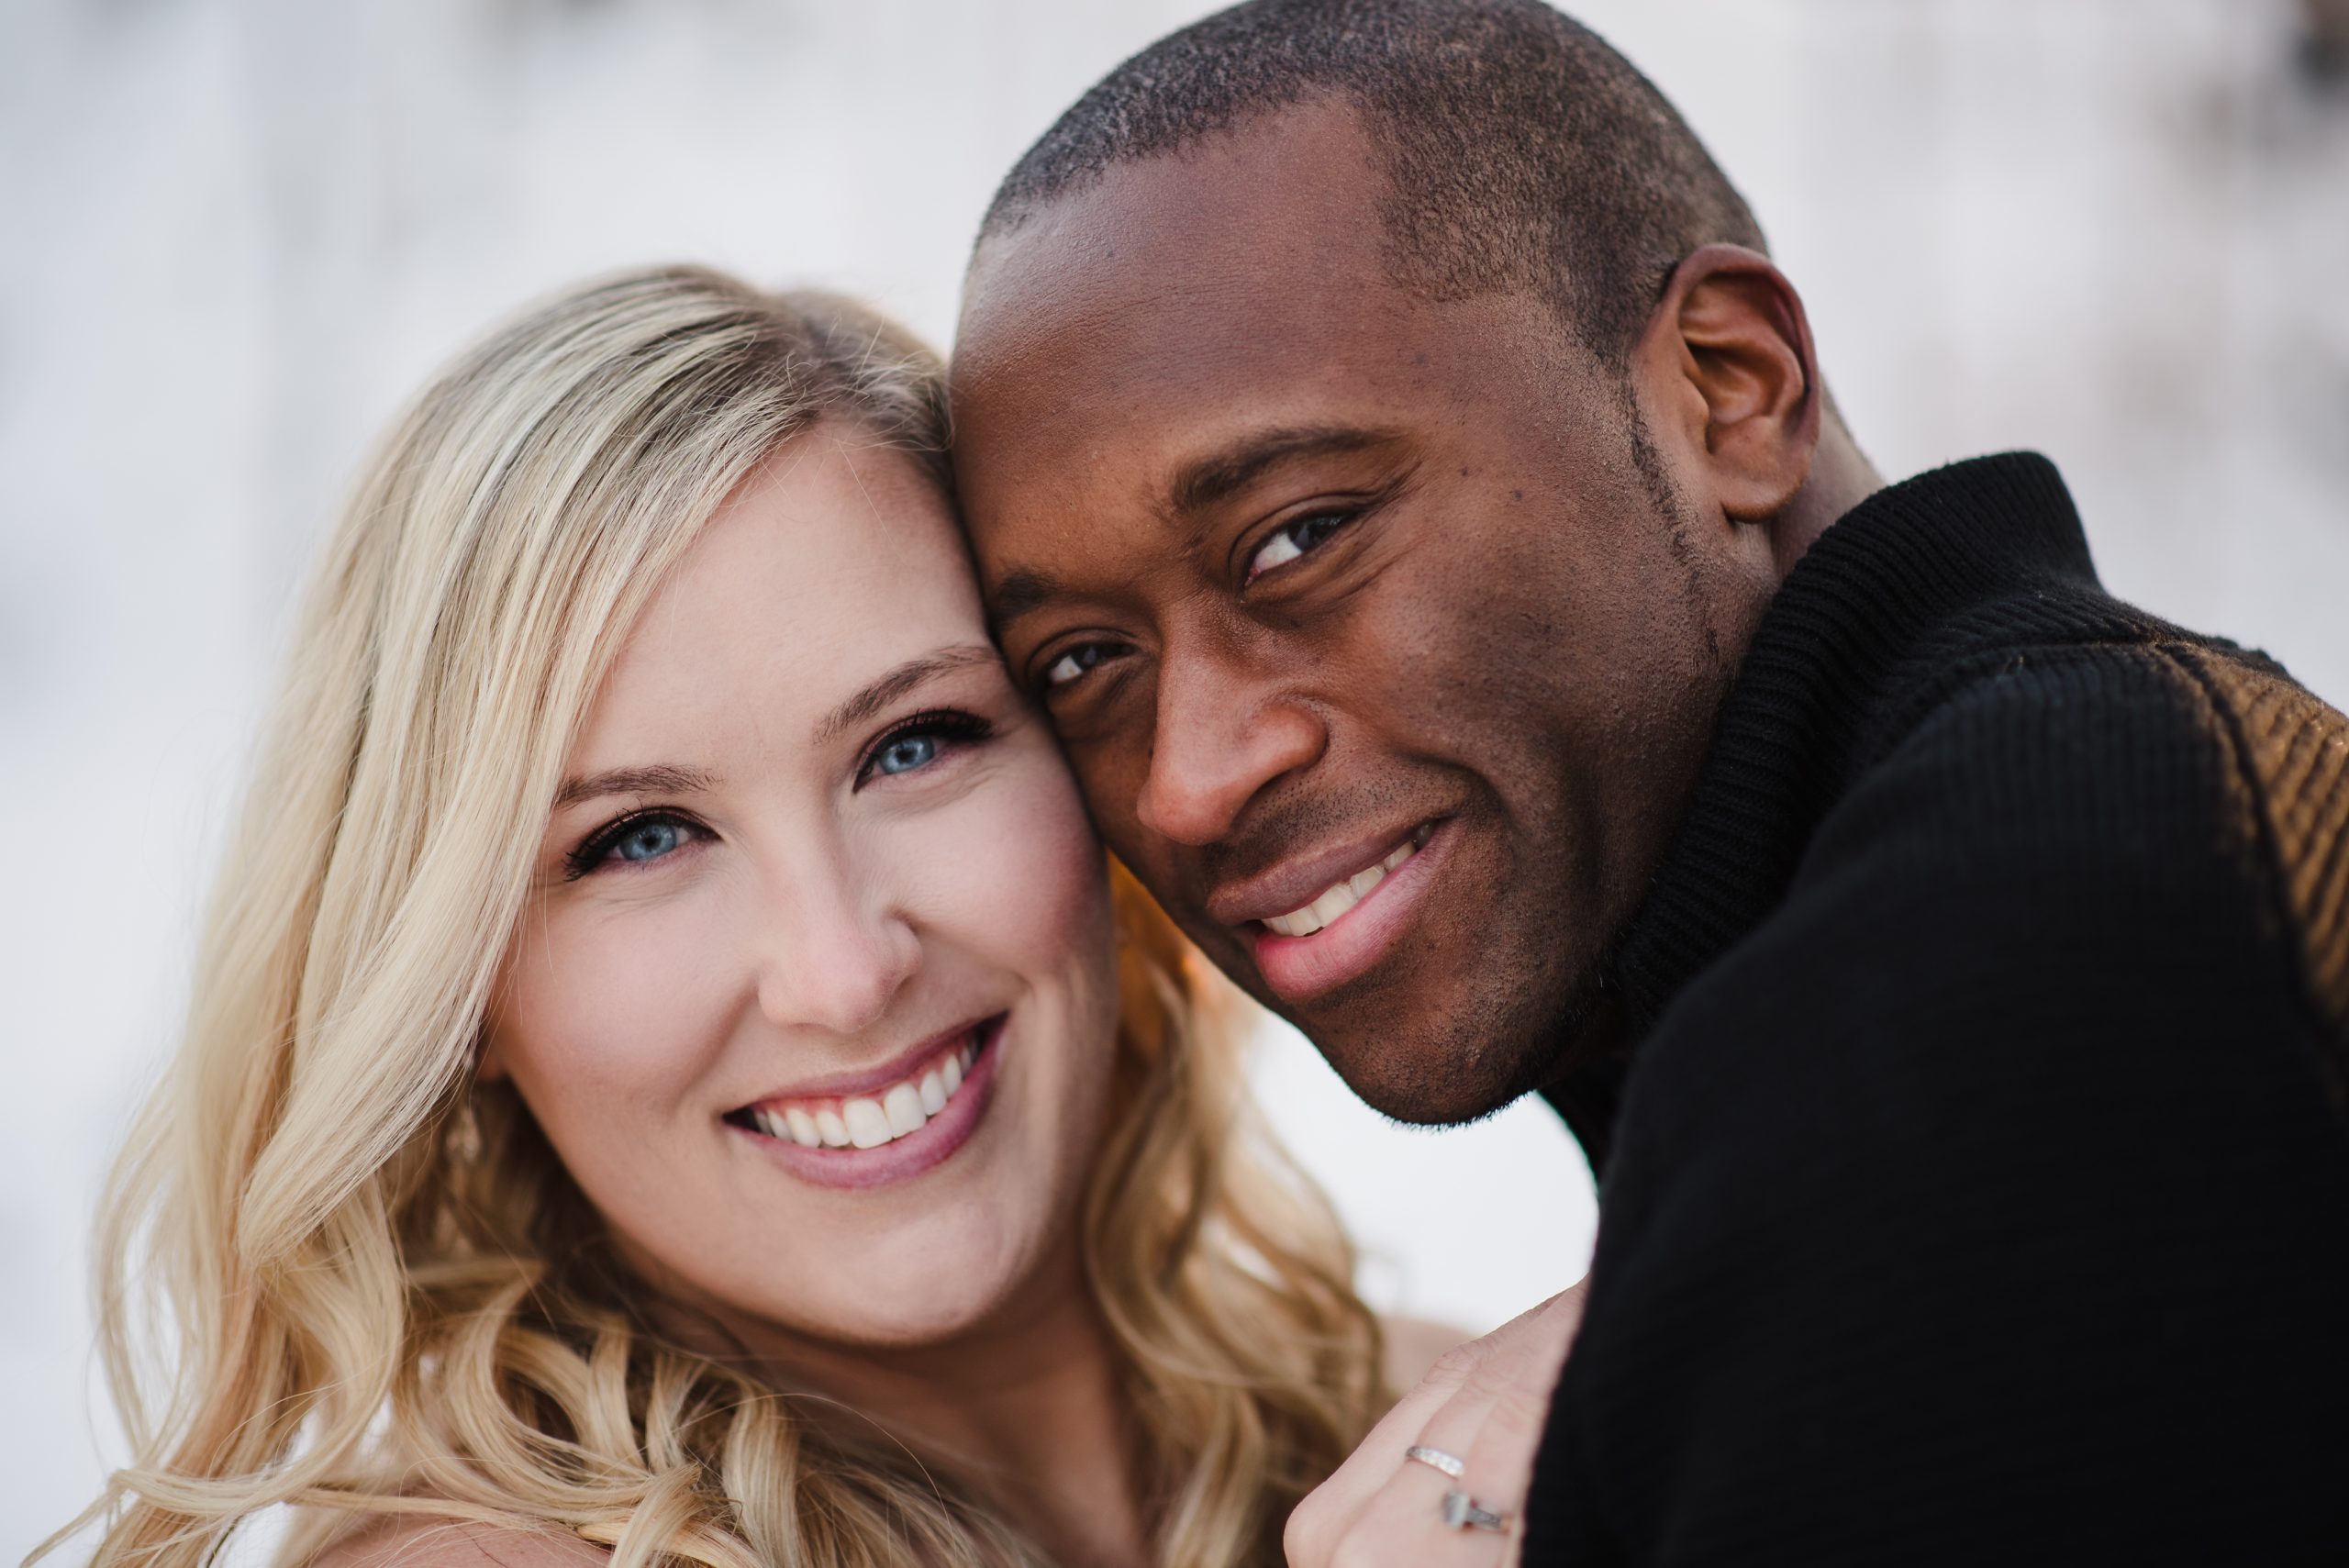 Winter engagement session in Indianapolis